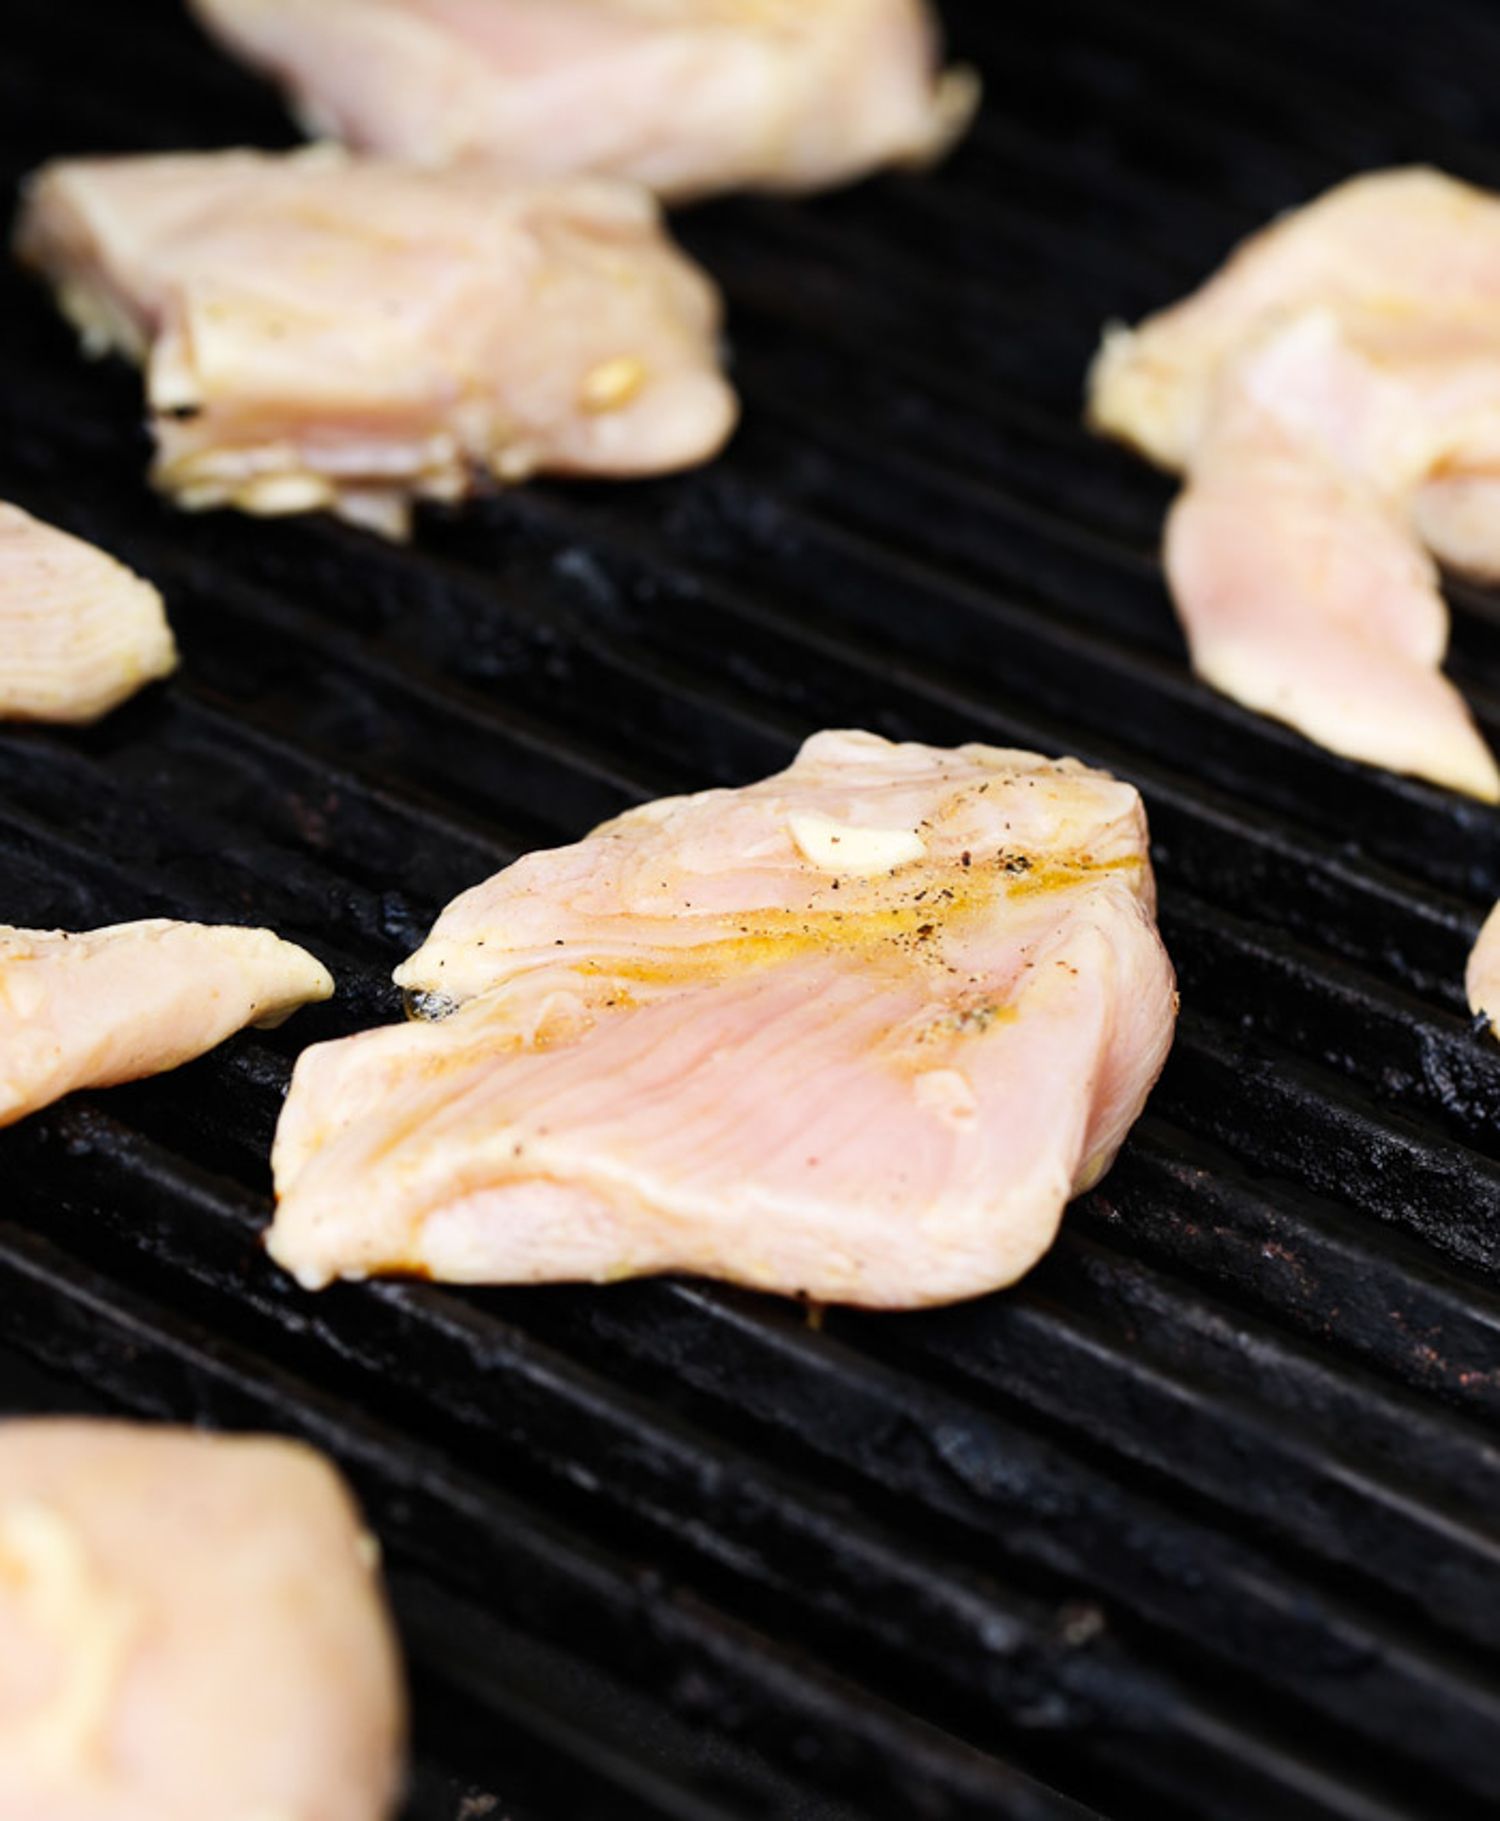 Chicken on the grill topped with citrus juice